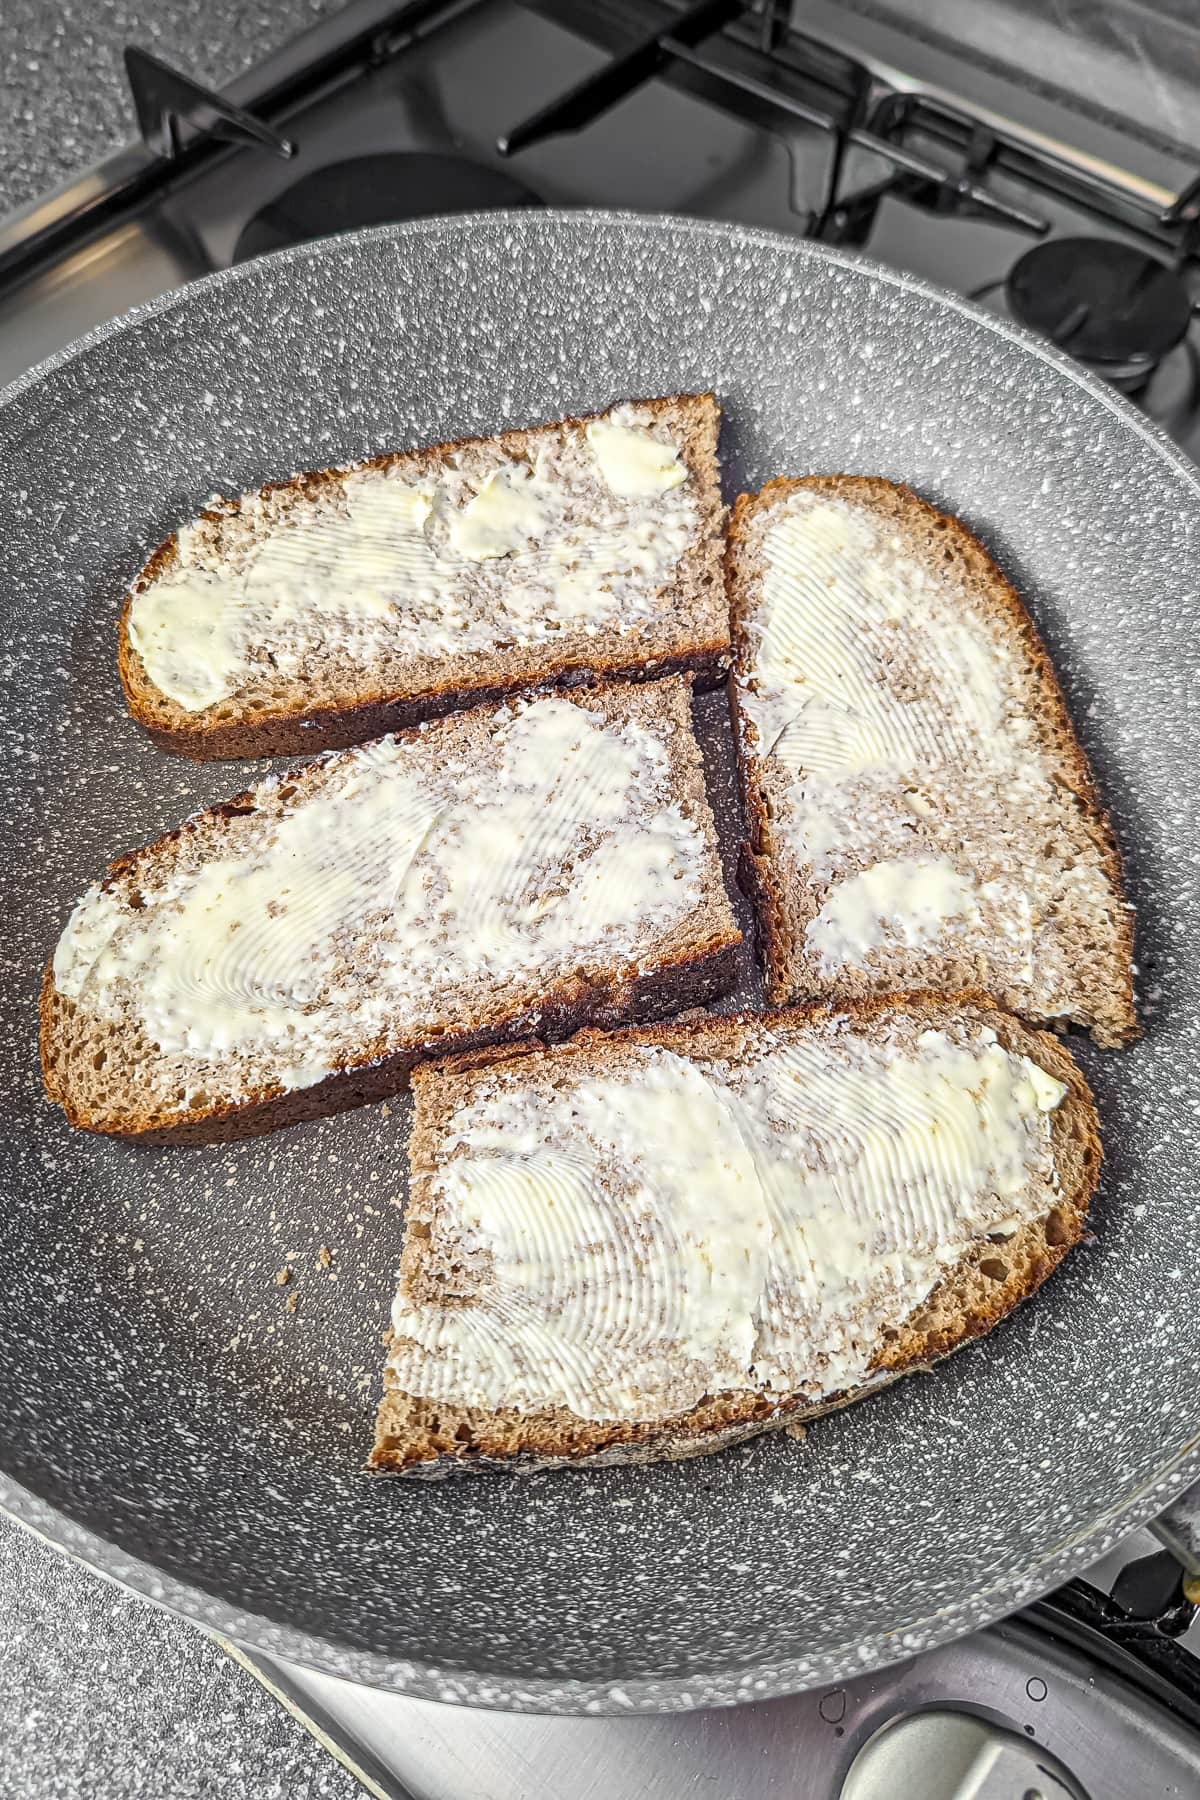 Three slices of brown bread spread with butter in a frying pan.